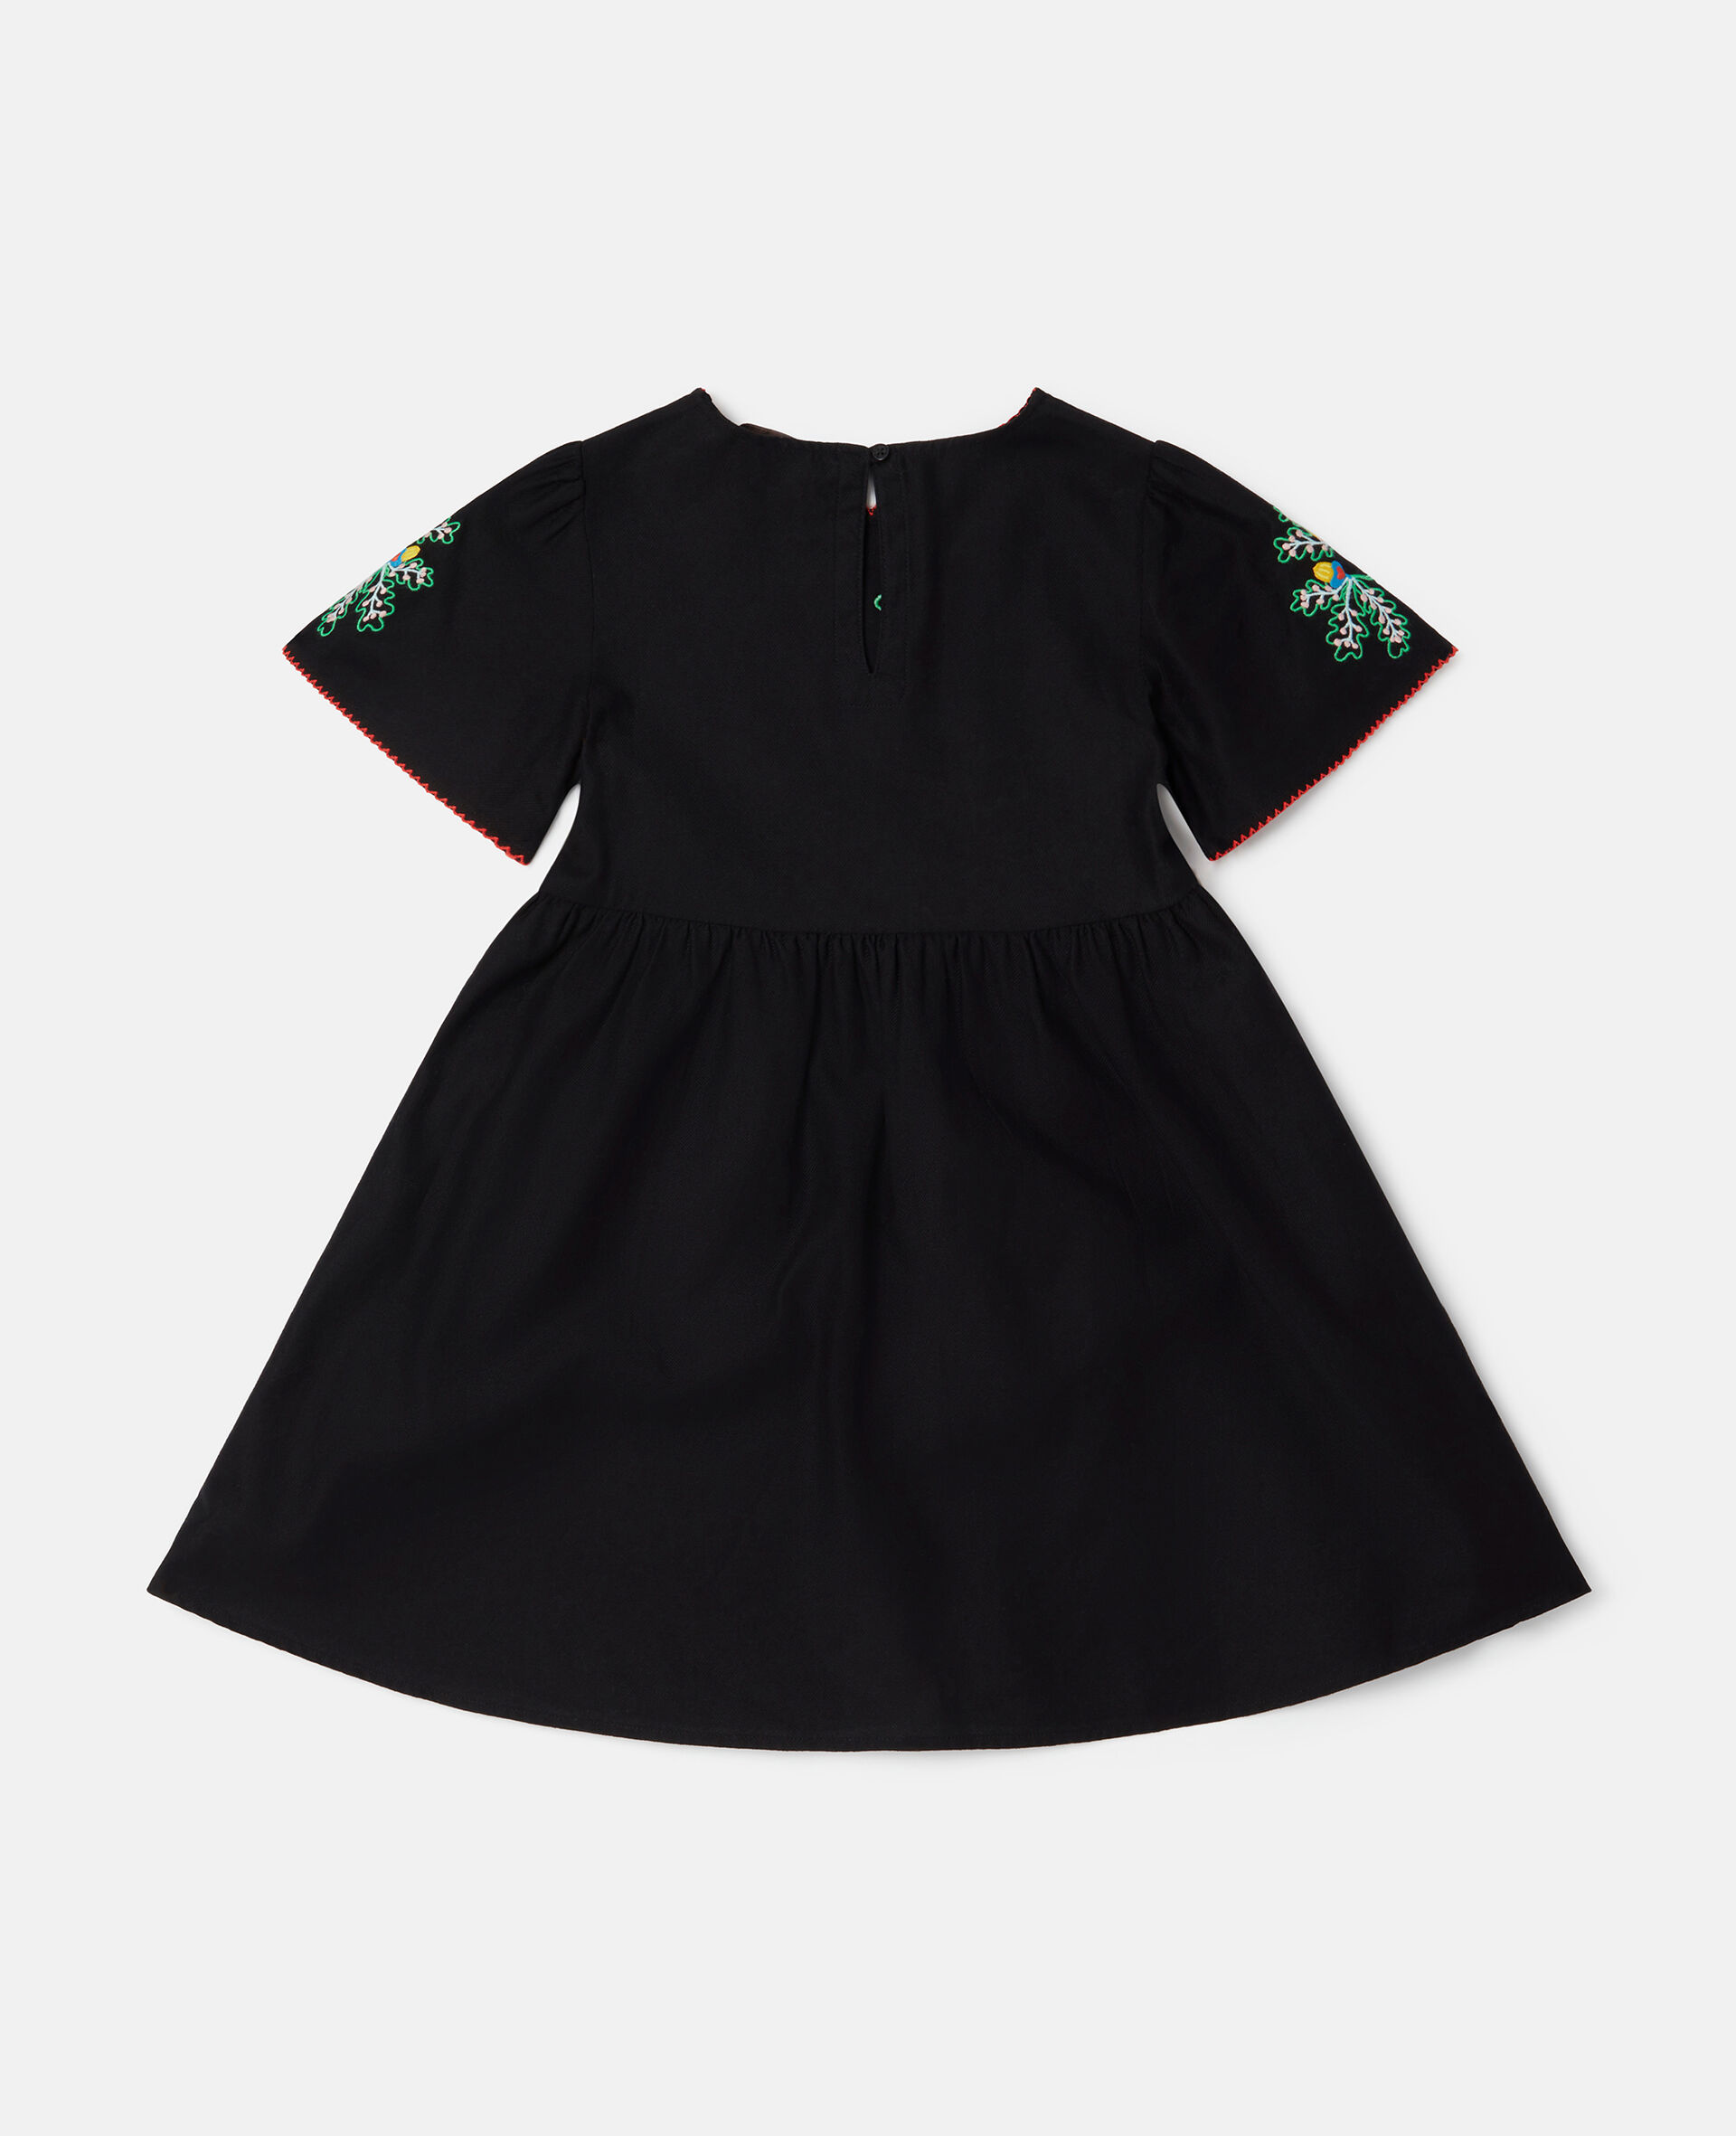 Stella McCartney Kids' Clothes for Gap - Racked NY